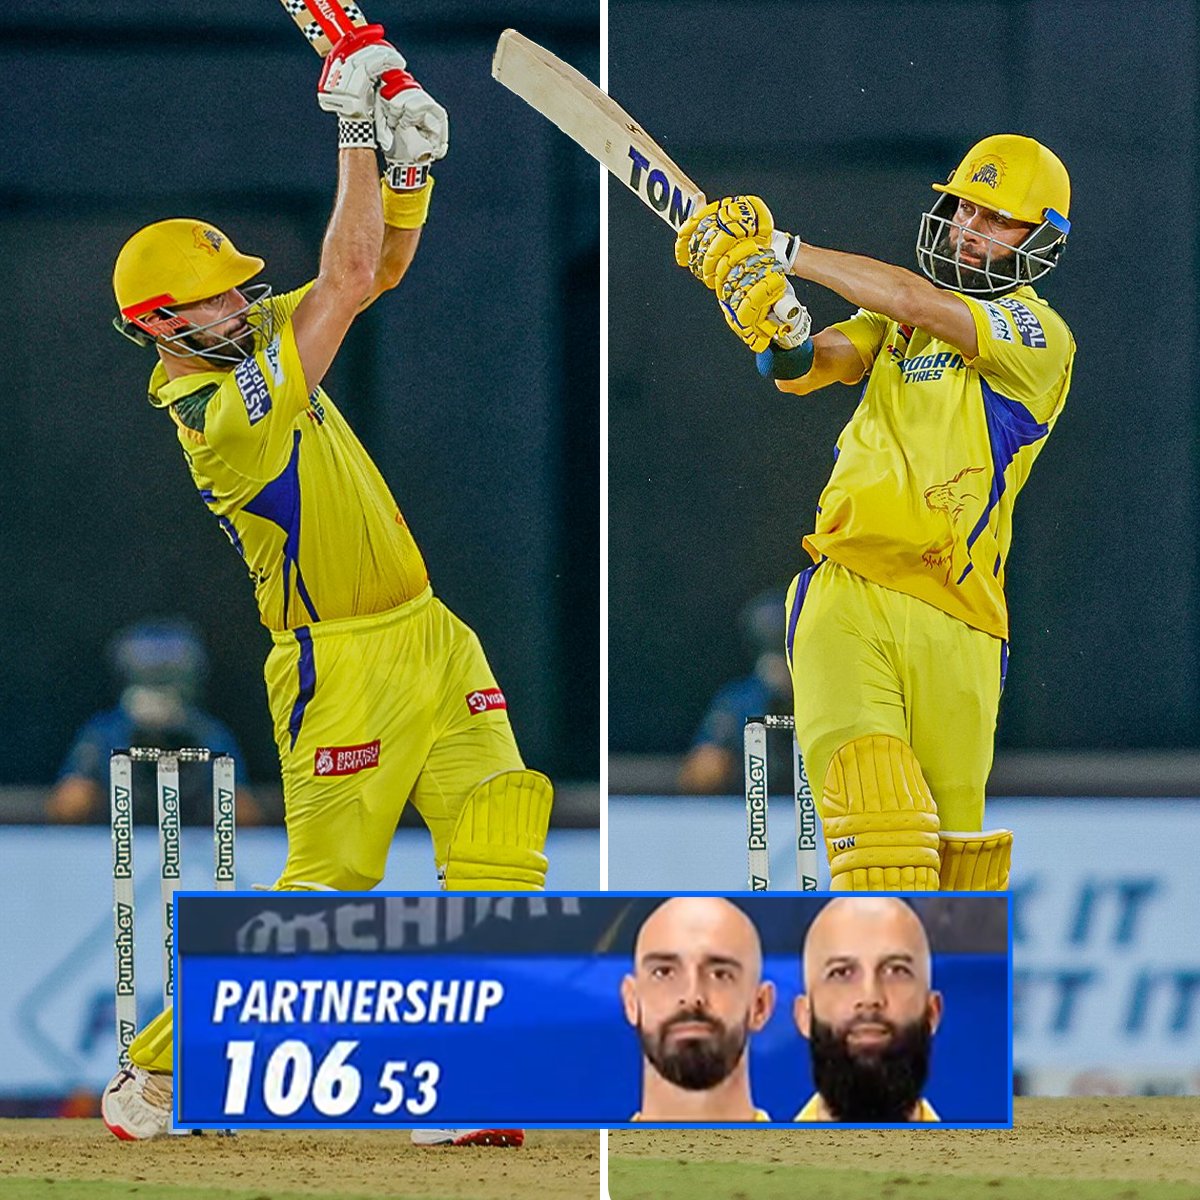 Gujarat GT Chennai CSK by 35 Runs in Tata IPL 2024 Match 😀 Sai Sudharsan and Gill Batted Superbly and both Scored Century While CSK Bowlers Struggled, For CSK Rahane Rachin Ruturaj Failed Badly and CSK Were 10/3 from there they Reached 196 Due to Fifties by Mitchell and Moeen,…